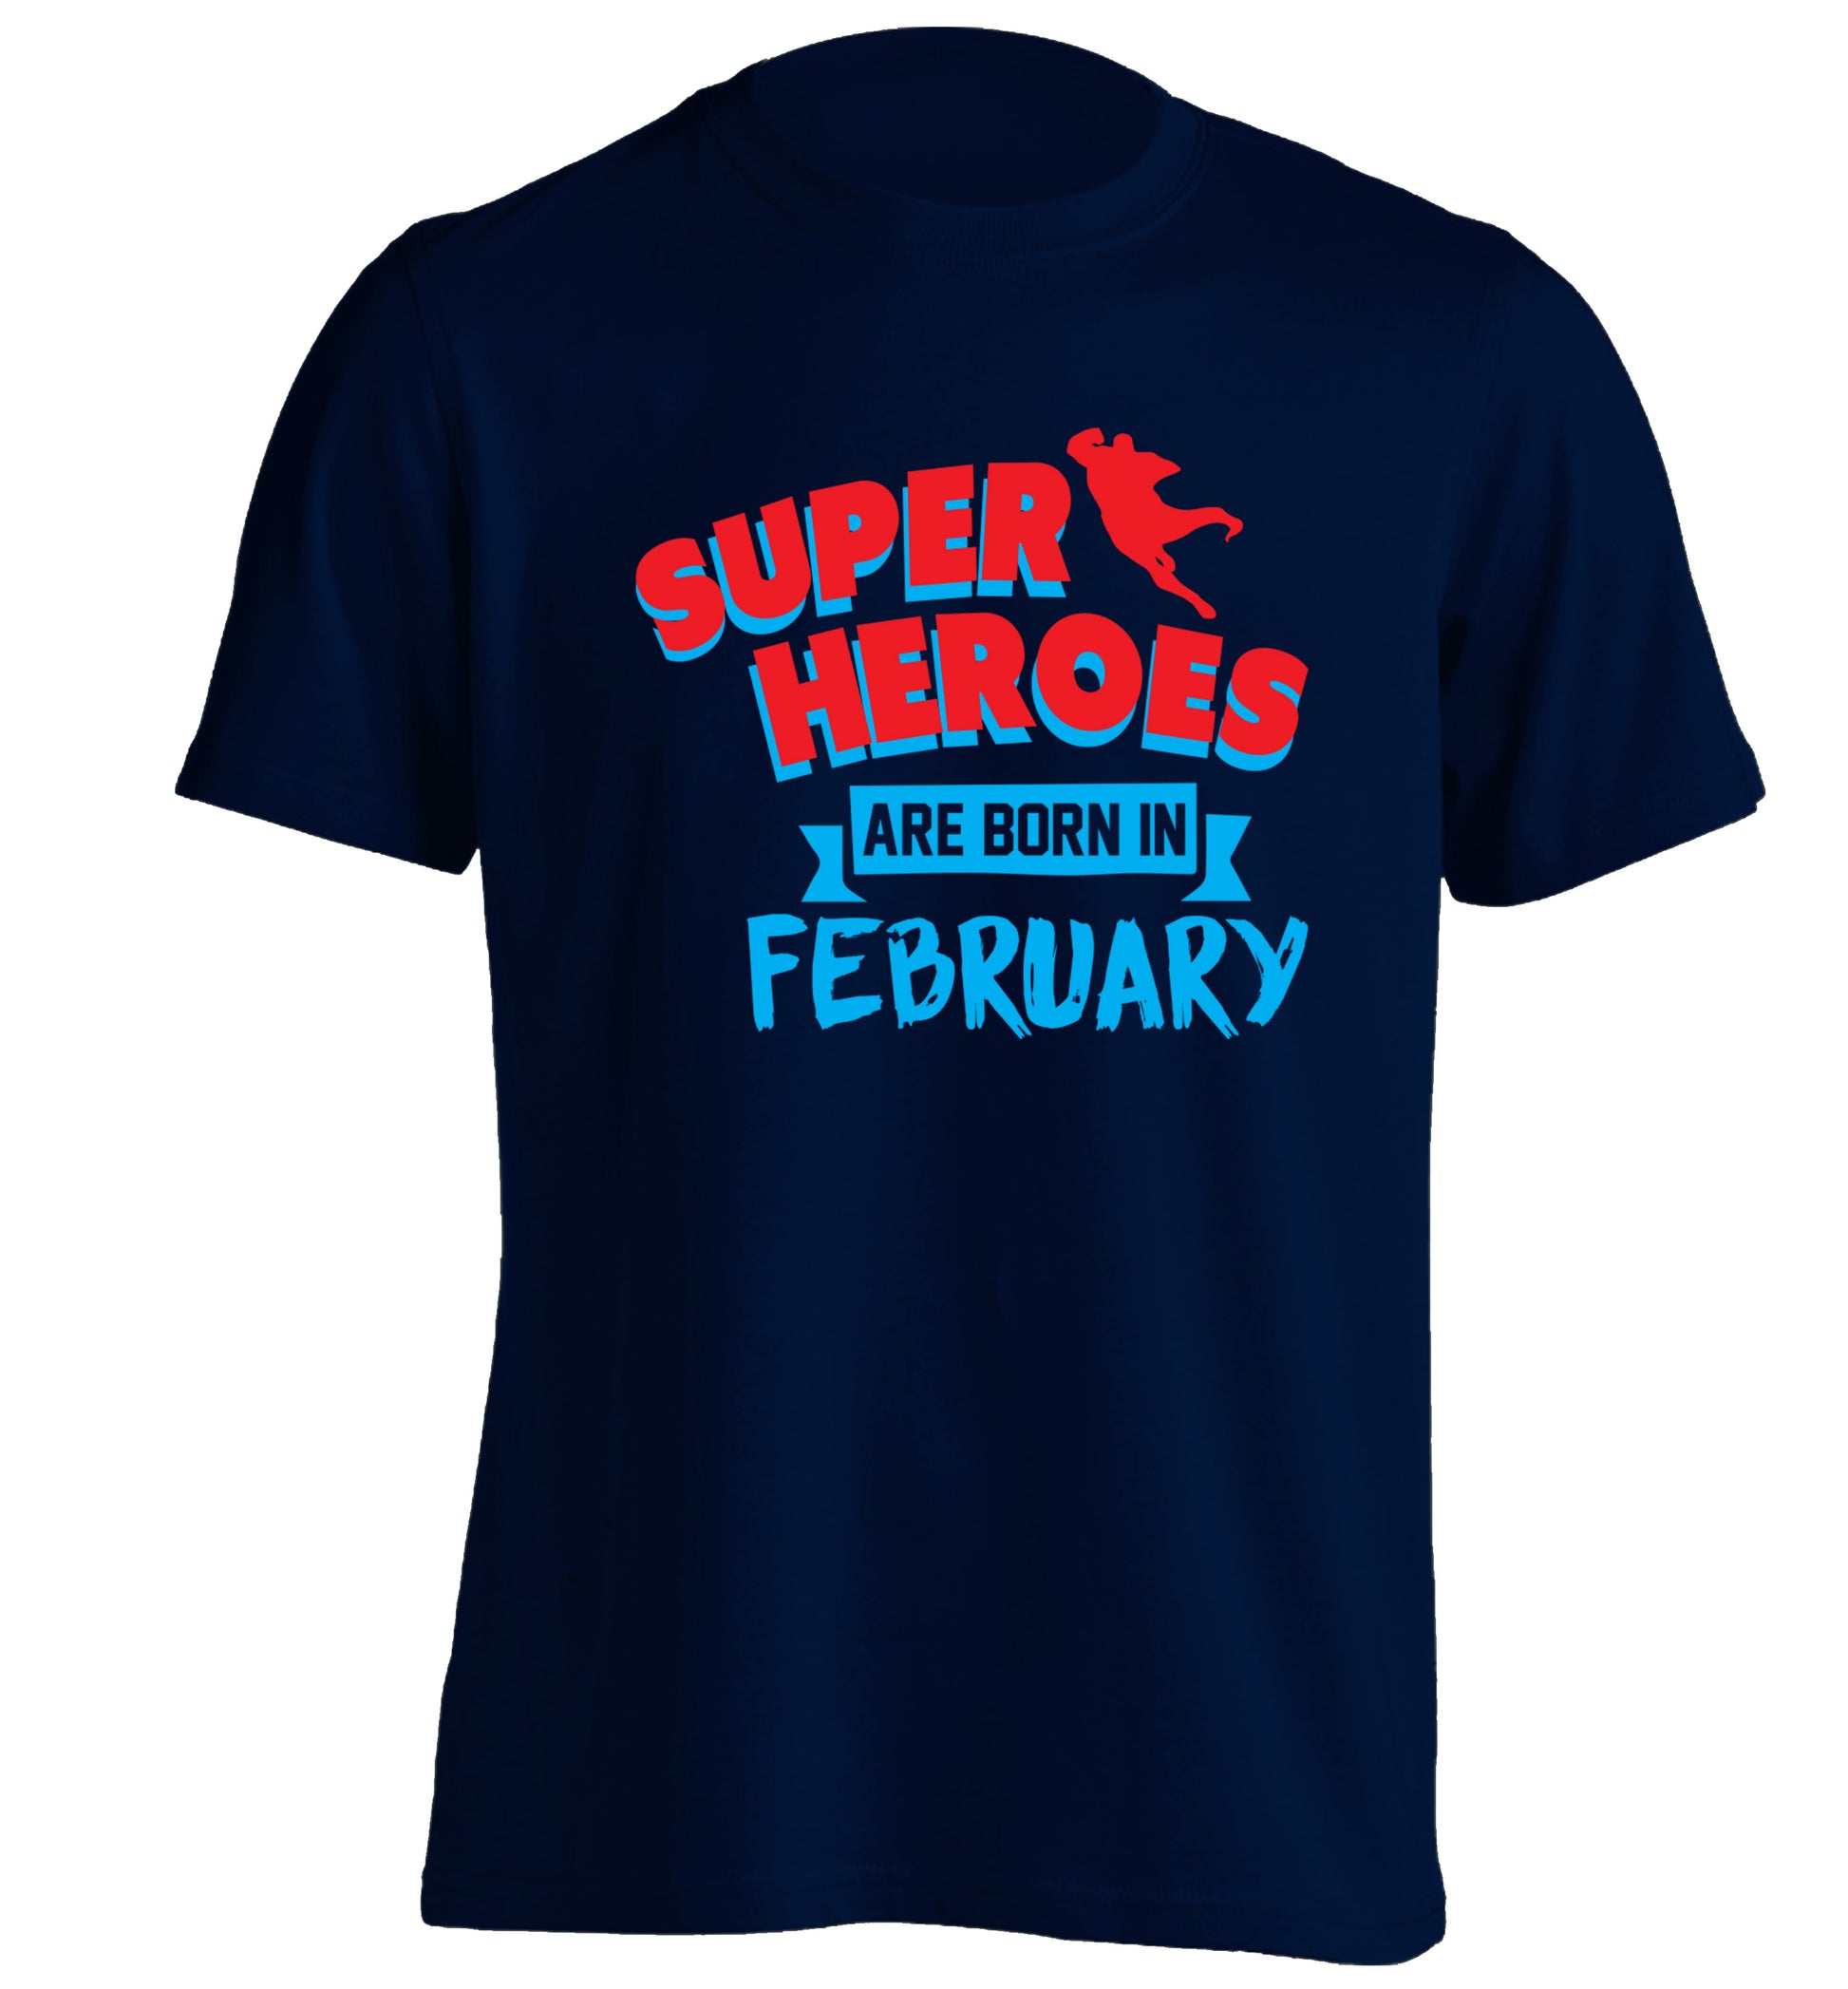 superheroes are born in February adults unisex navy Tshirt 2XL